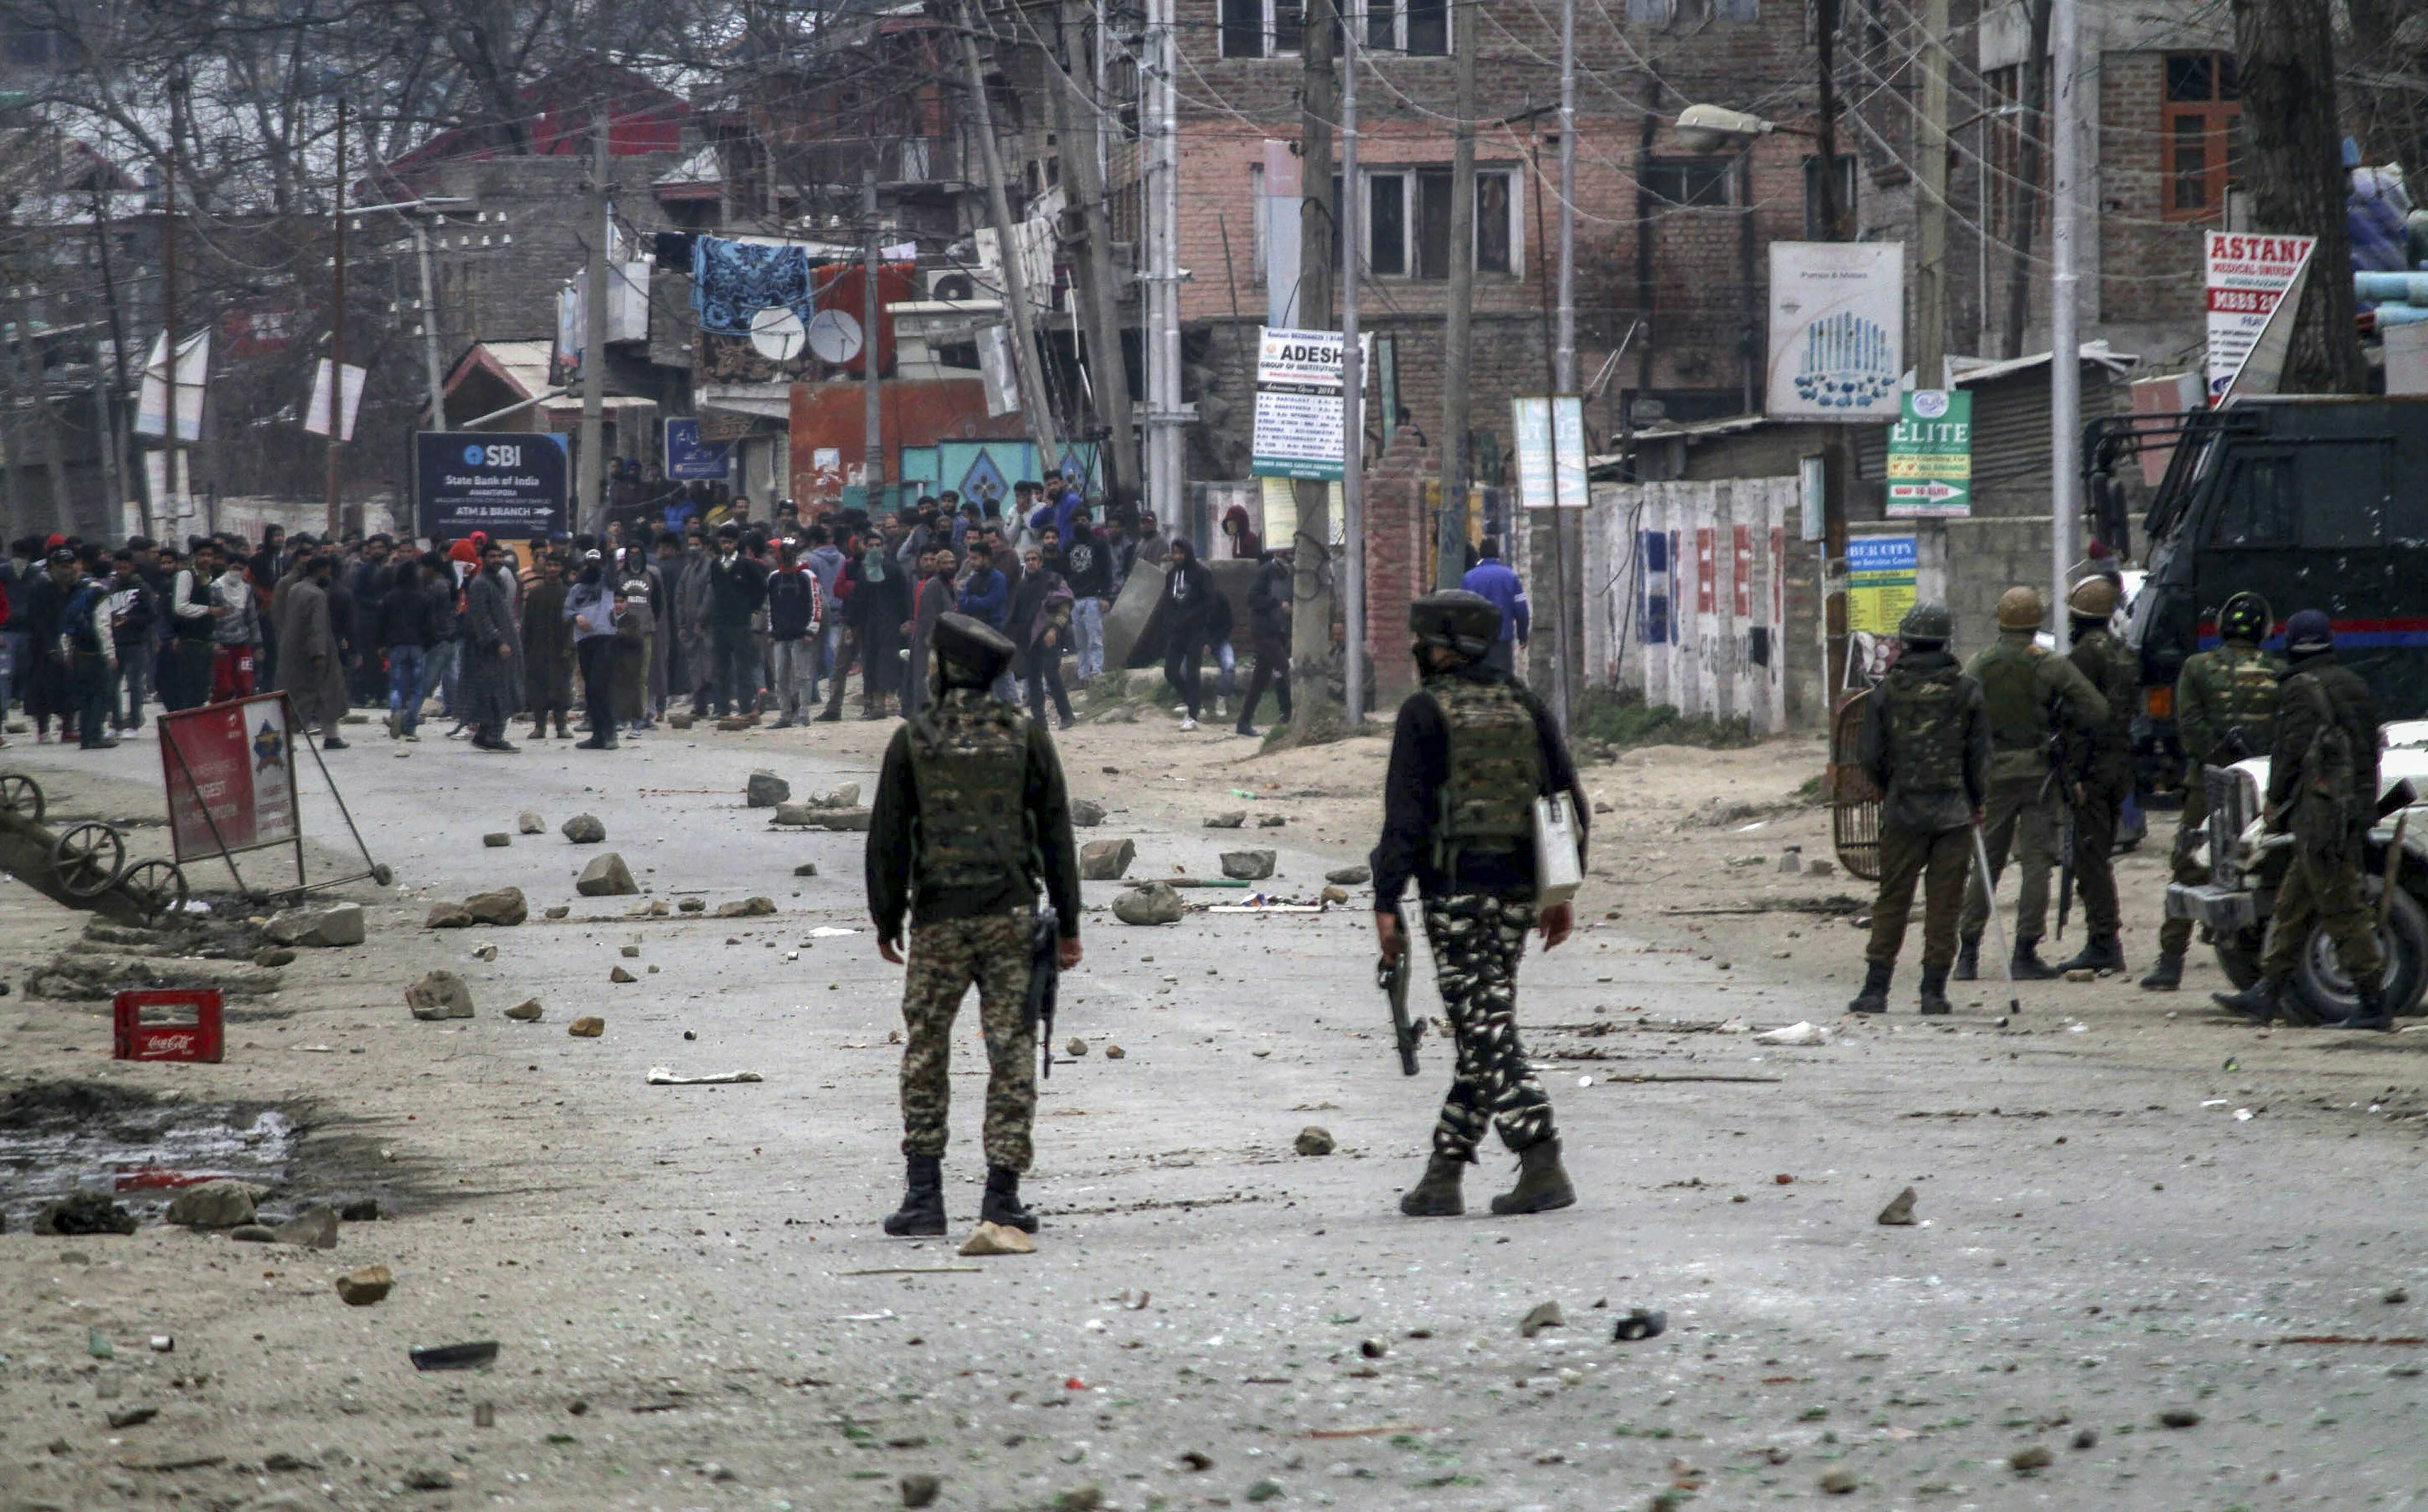 Youth hurls stones at security forces during a protest against the death of Rizwan Asad, who allegedly died in Police custody, in Awantipora area of Pulwama district - PTI